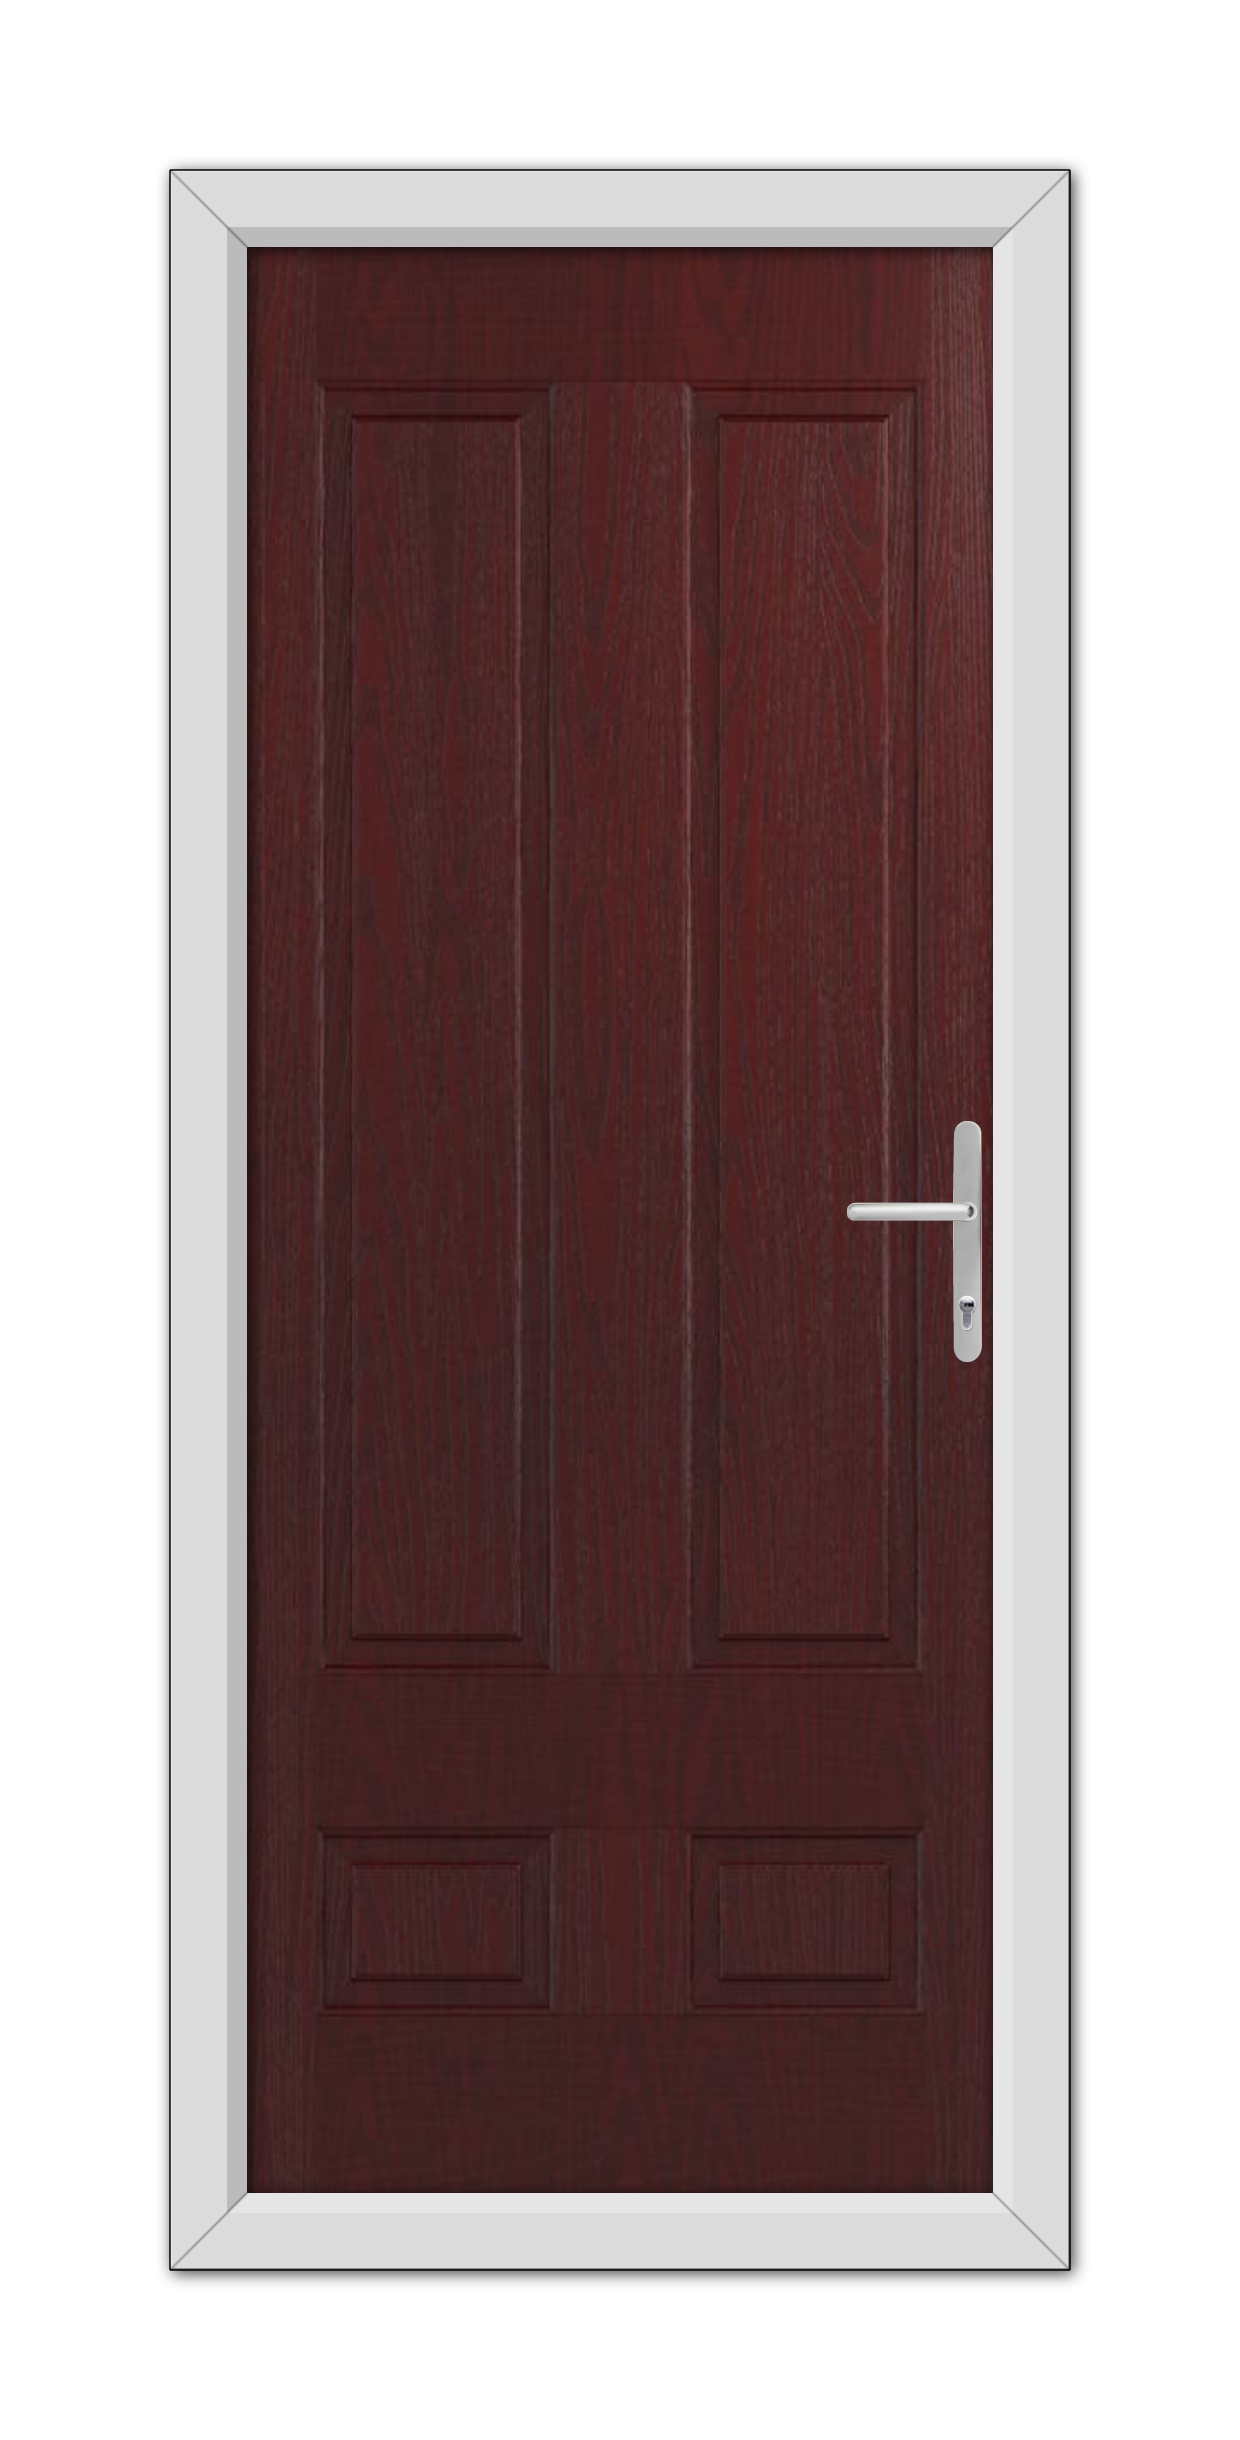 A Rosewood Aston Solid Composite Door 48mm Timber Core with a white frame and a metallic handle, centered within a plain white background.